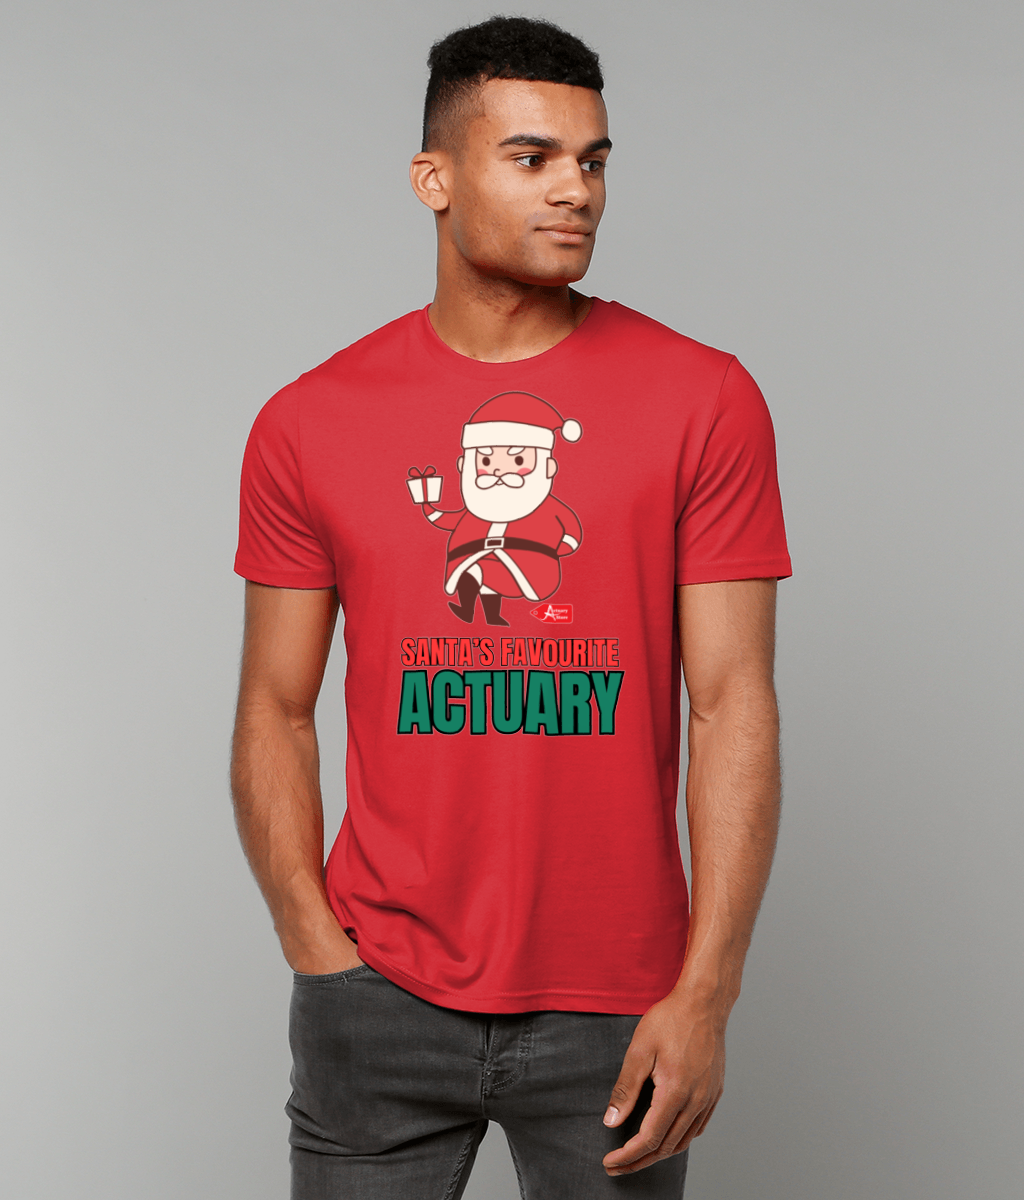 Santa's Favourite Actuary Christmas Santa With Present Any Colour T-Shirt (Red, Green, White Variations)